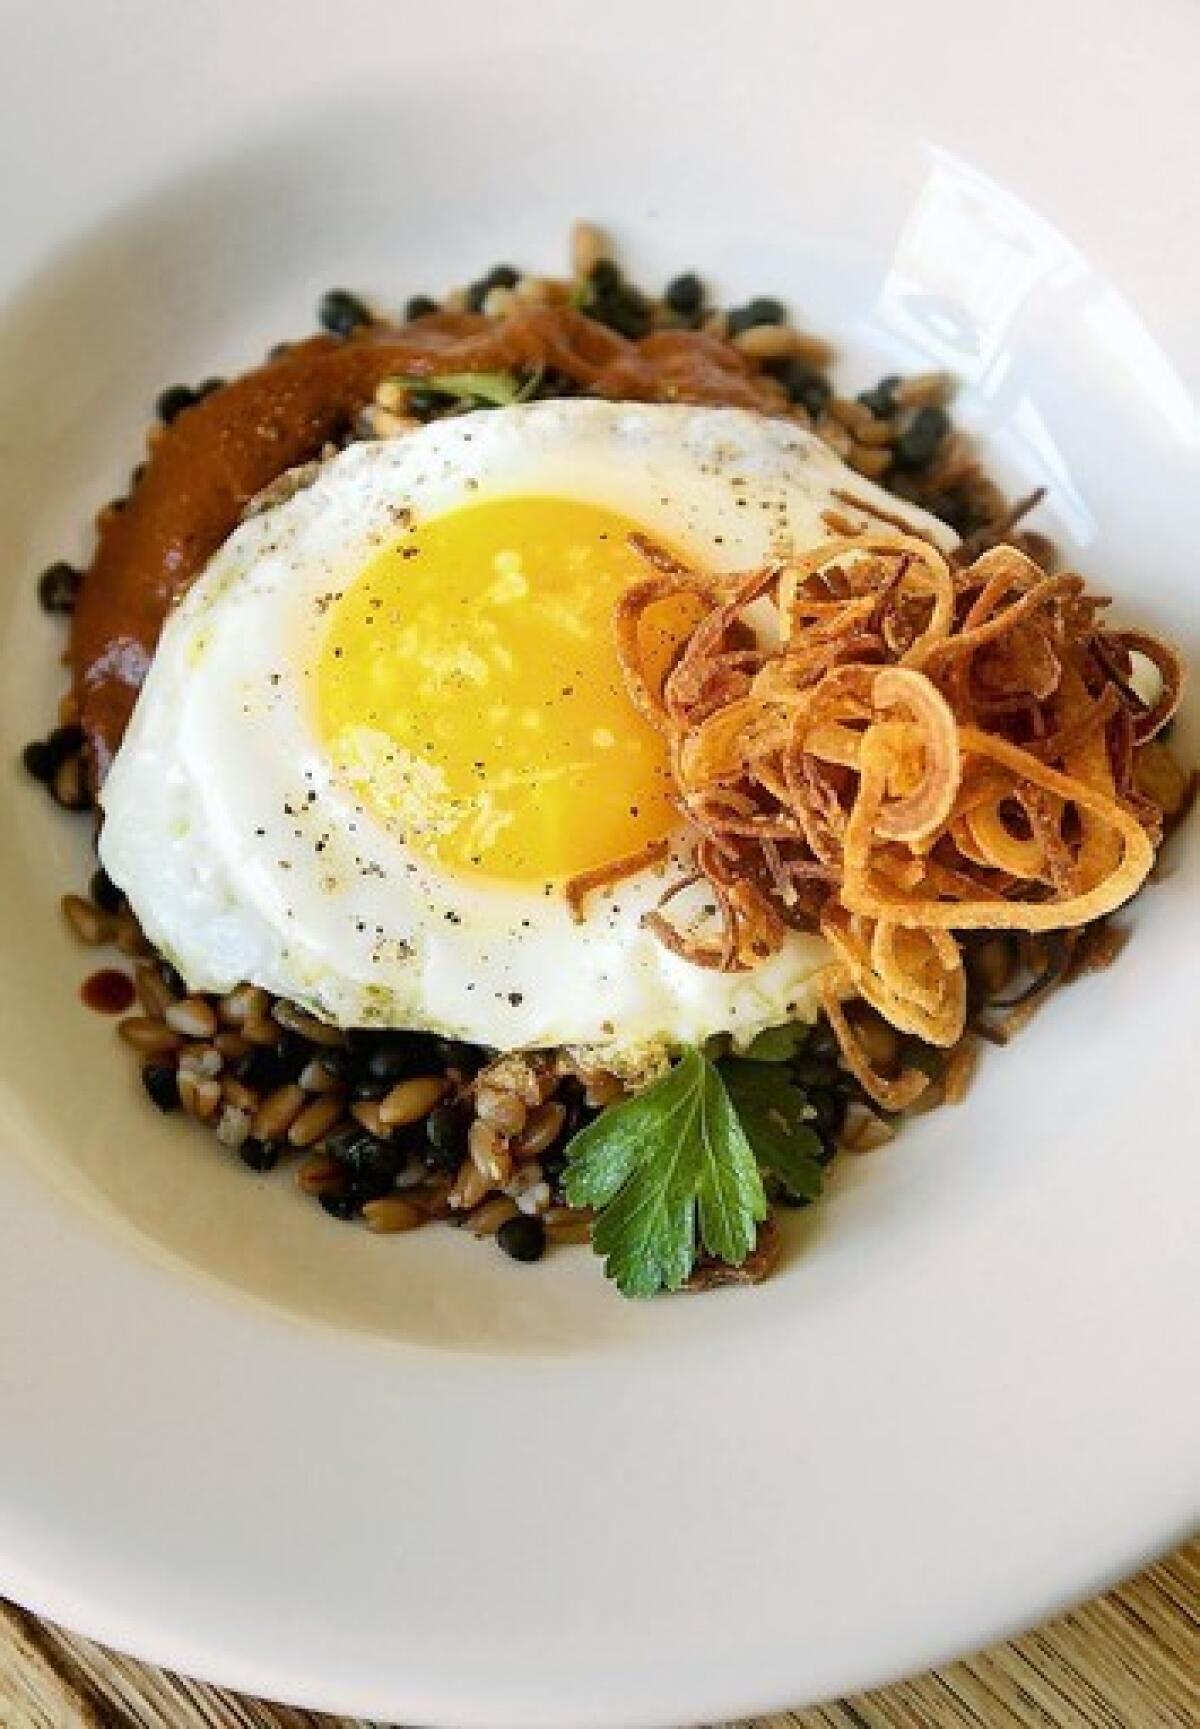 Farro and lentils with fried shallots, harissa and a fried egg are served for brunch at Cortez in Los Angeles.